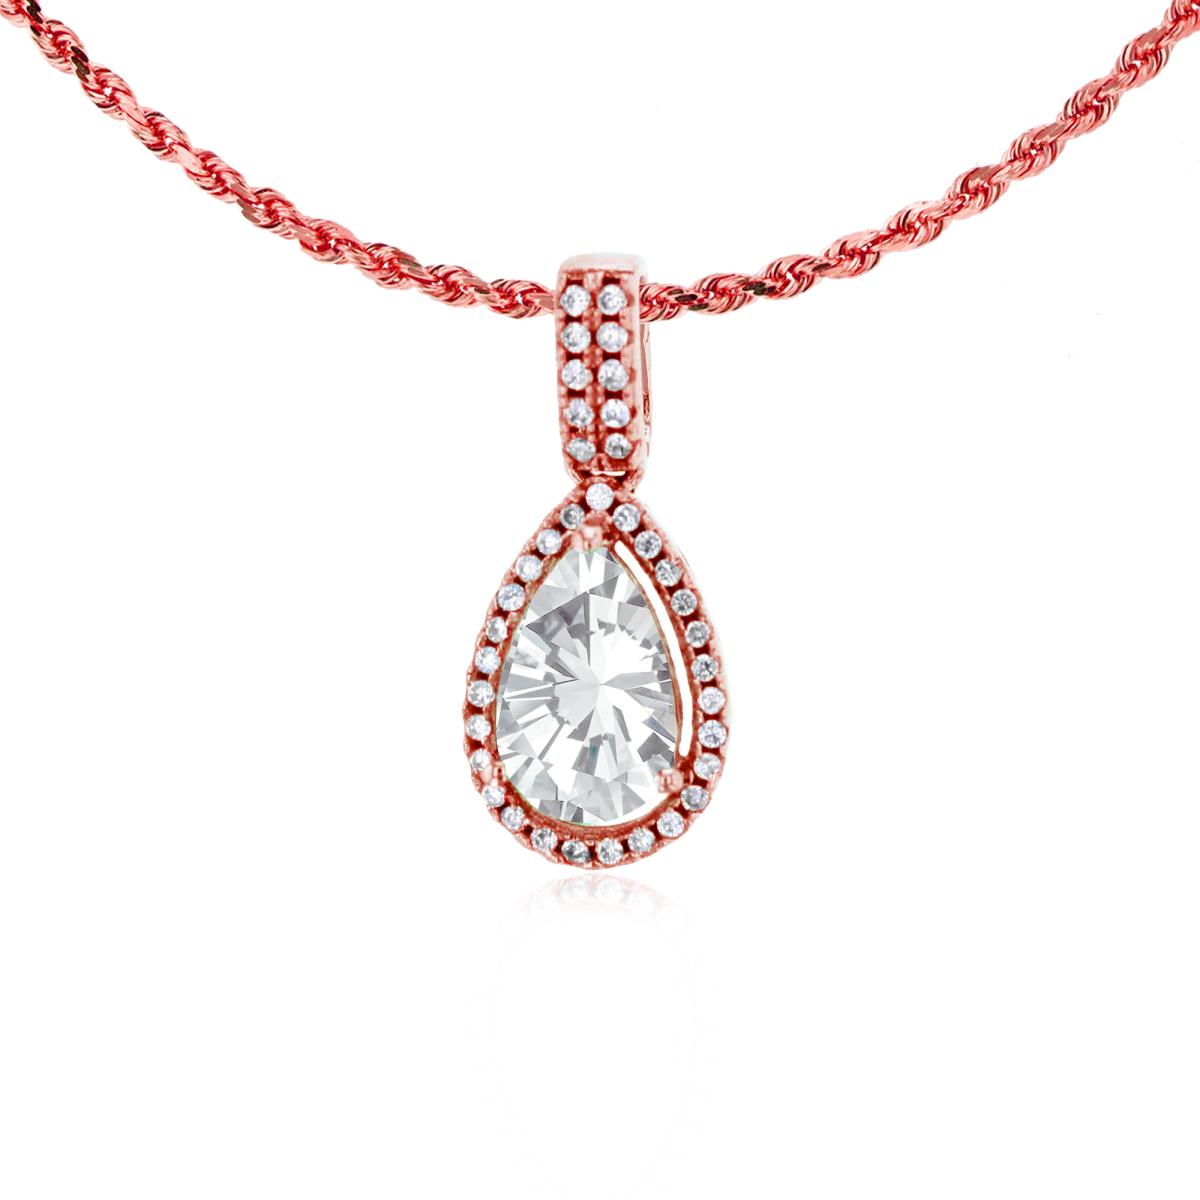 10K Rose Gold 8x5mm Pear Cut White Topaz & 0.11 CTTW Diamond Halo 18" Rope Chain Necklace